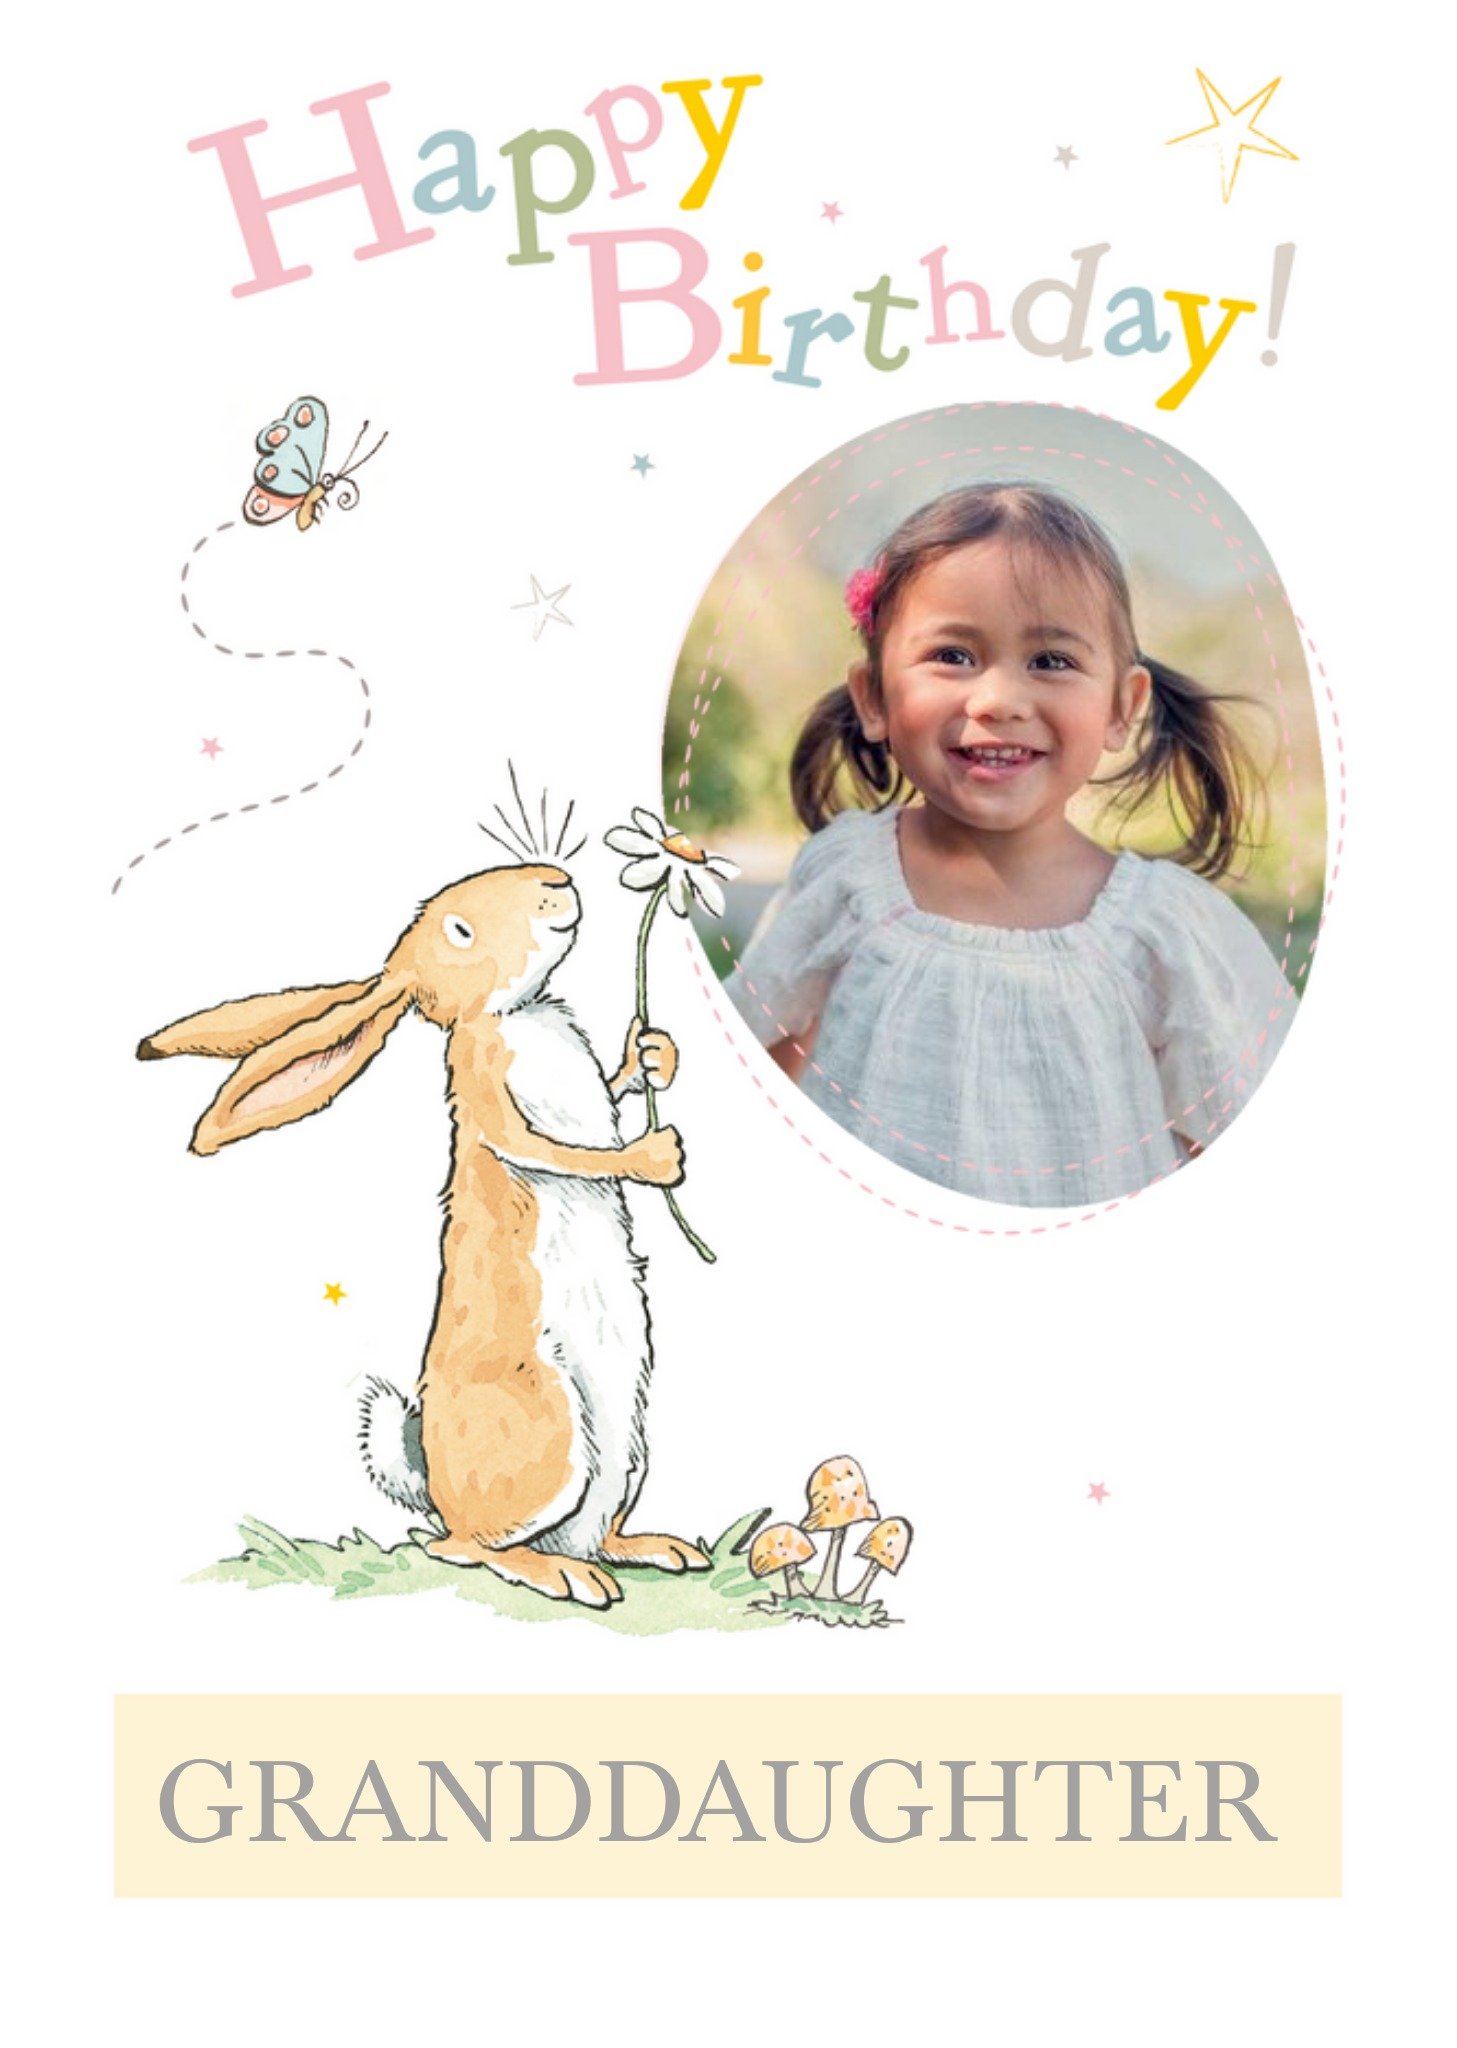 Guess How Much I Love You Danilo Ghmily Granddaughter Photo Upload Birthday Card Ecard